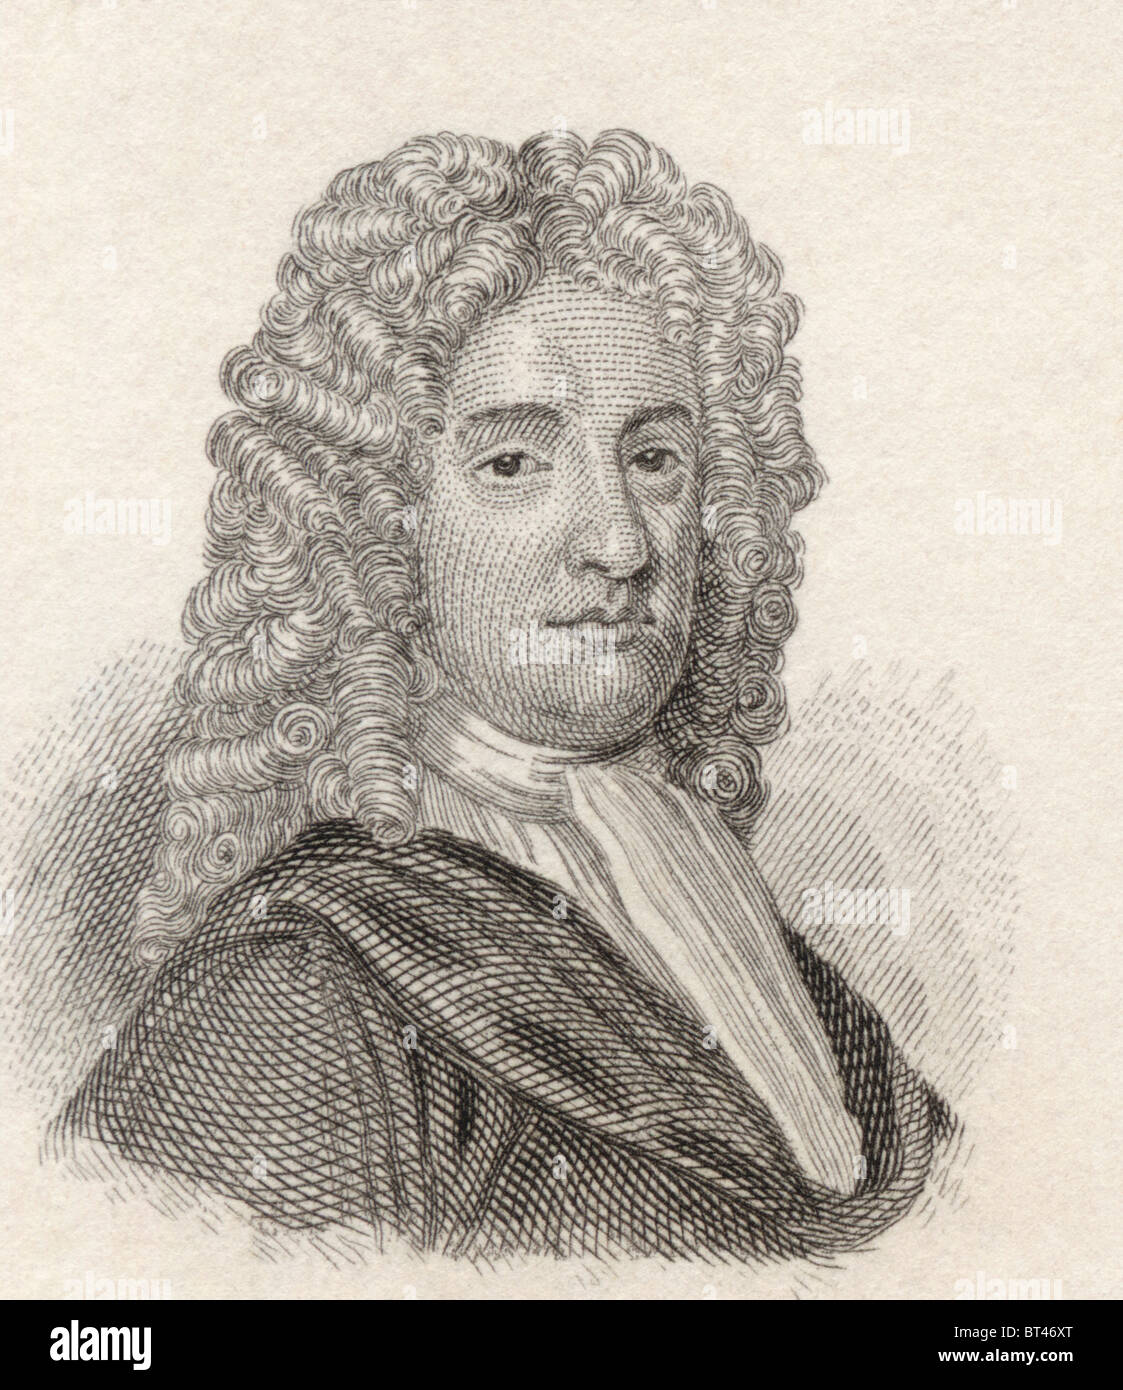 Nicholas Rowe, 1674 to 1718. English dramatist, poet and miscellaneous writer,appointed Poet Laureate in 1715. Stock Photo